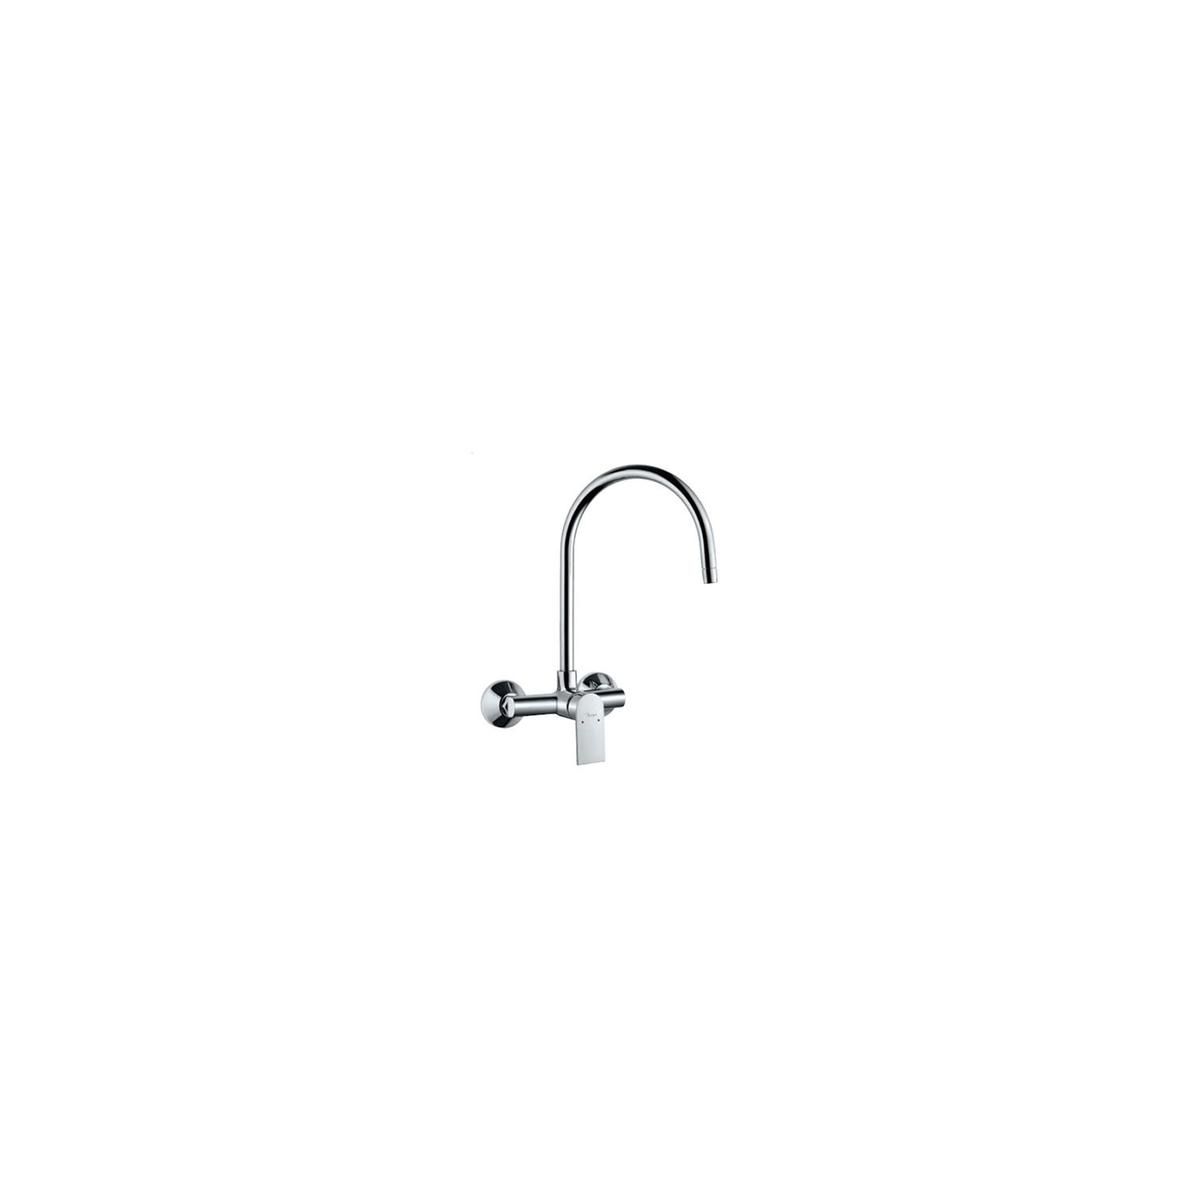 Jaquar Lyric Single Lever Sink Mixer With Swinging Spout On Upper Side (wall Mounted Model) With Connecting Legs Wall Flanges 